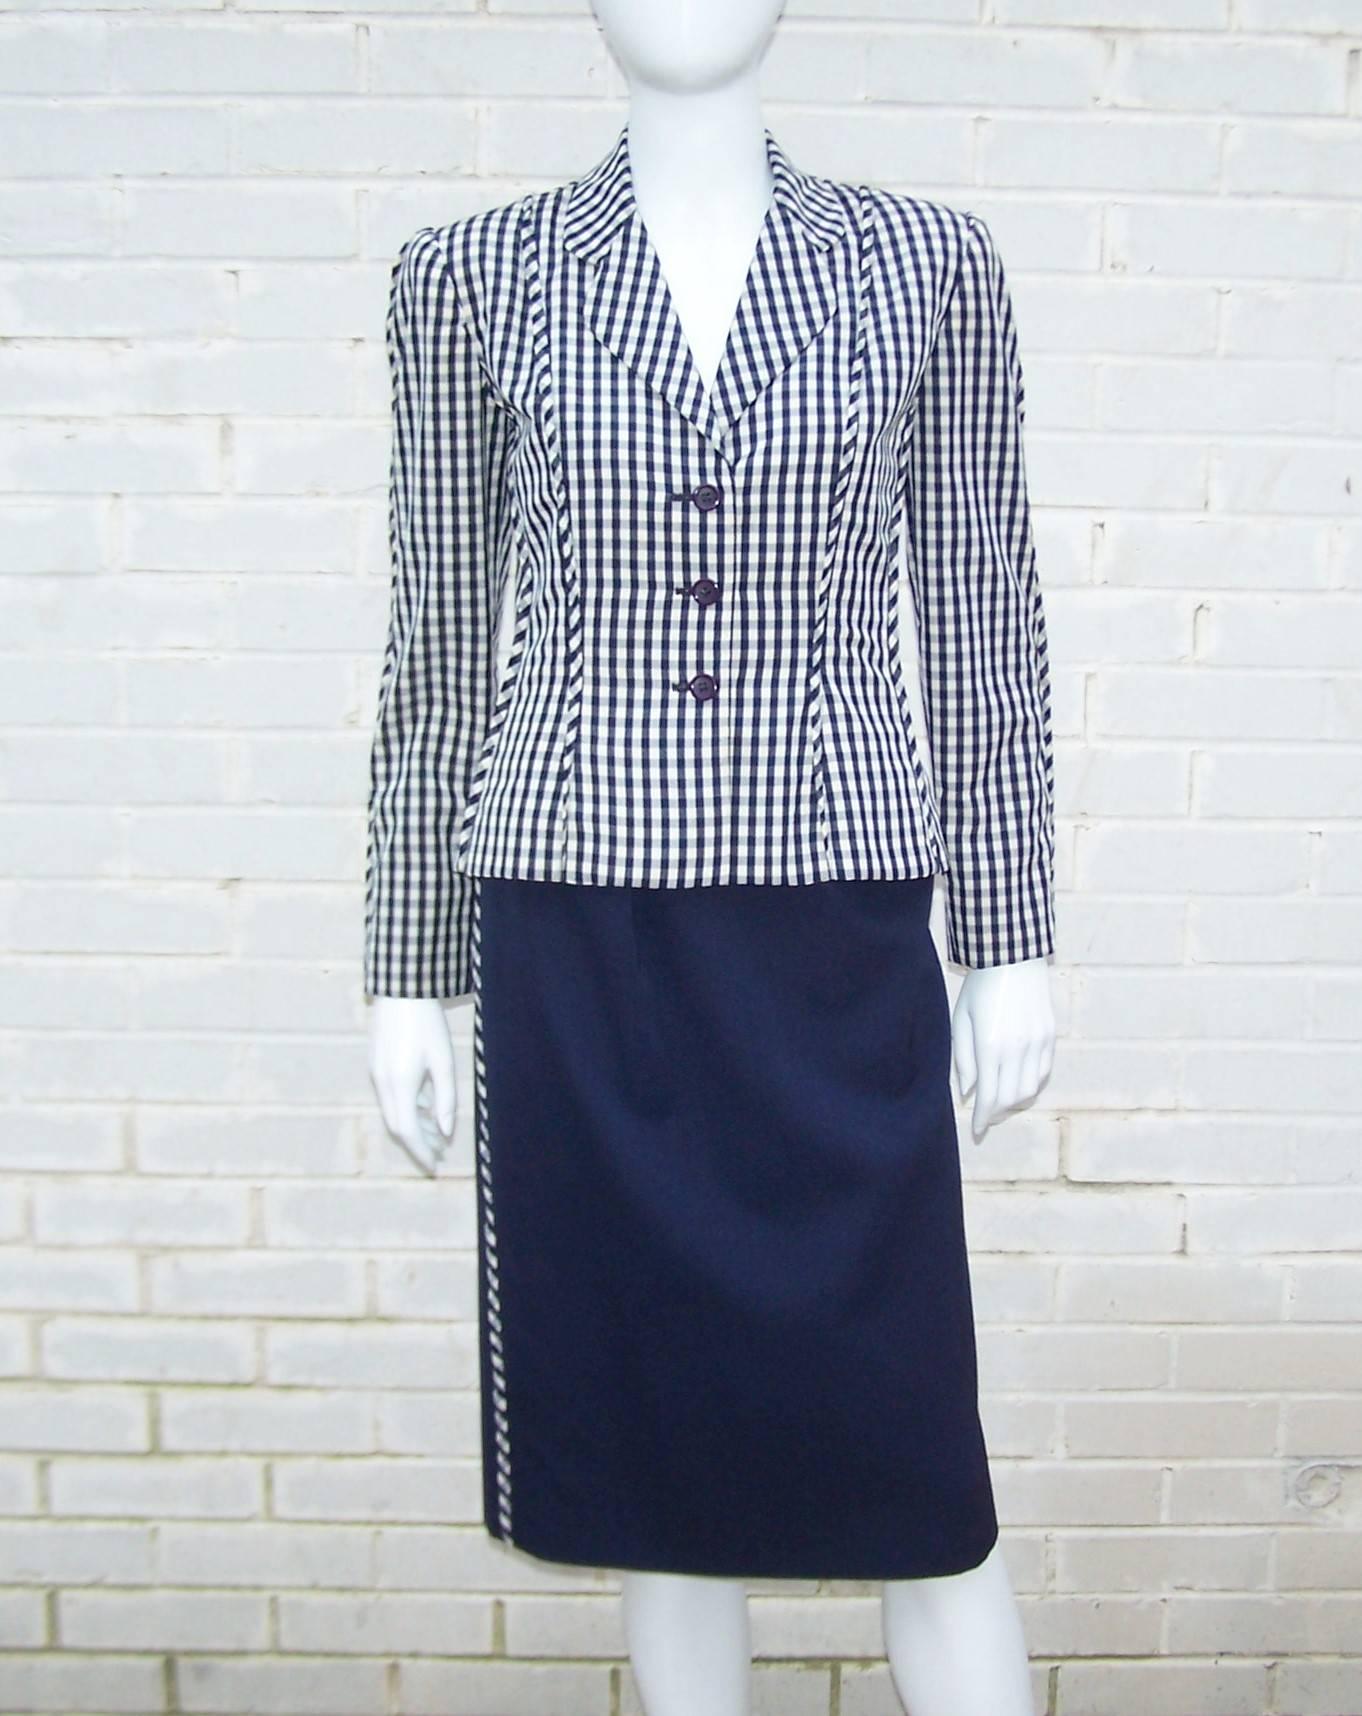 Bill Blass made a name for himself designing clothes for east coast society but this two piece suit has a 'working girl' aesthetic that could be appreciated by the design conscious career women of the 1970's.  The nod to a 1940's silhouette includes